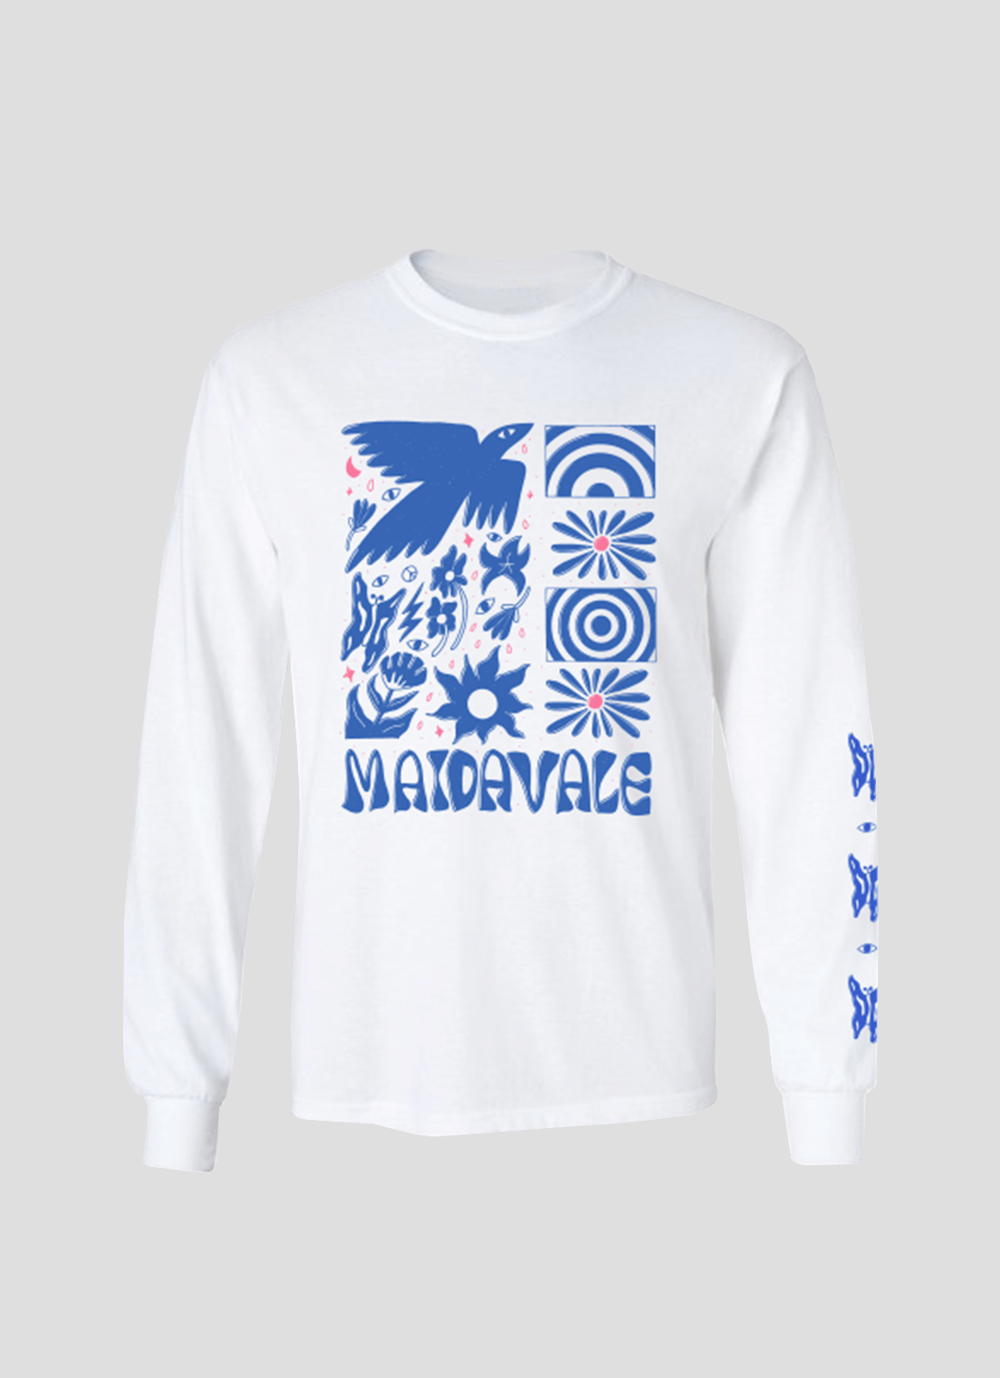 Long Sleeve [White/Blue/Pink]